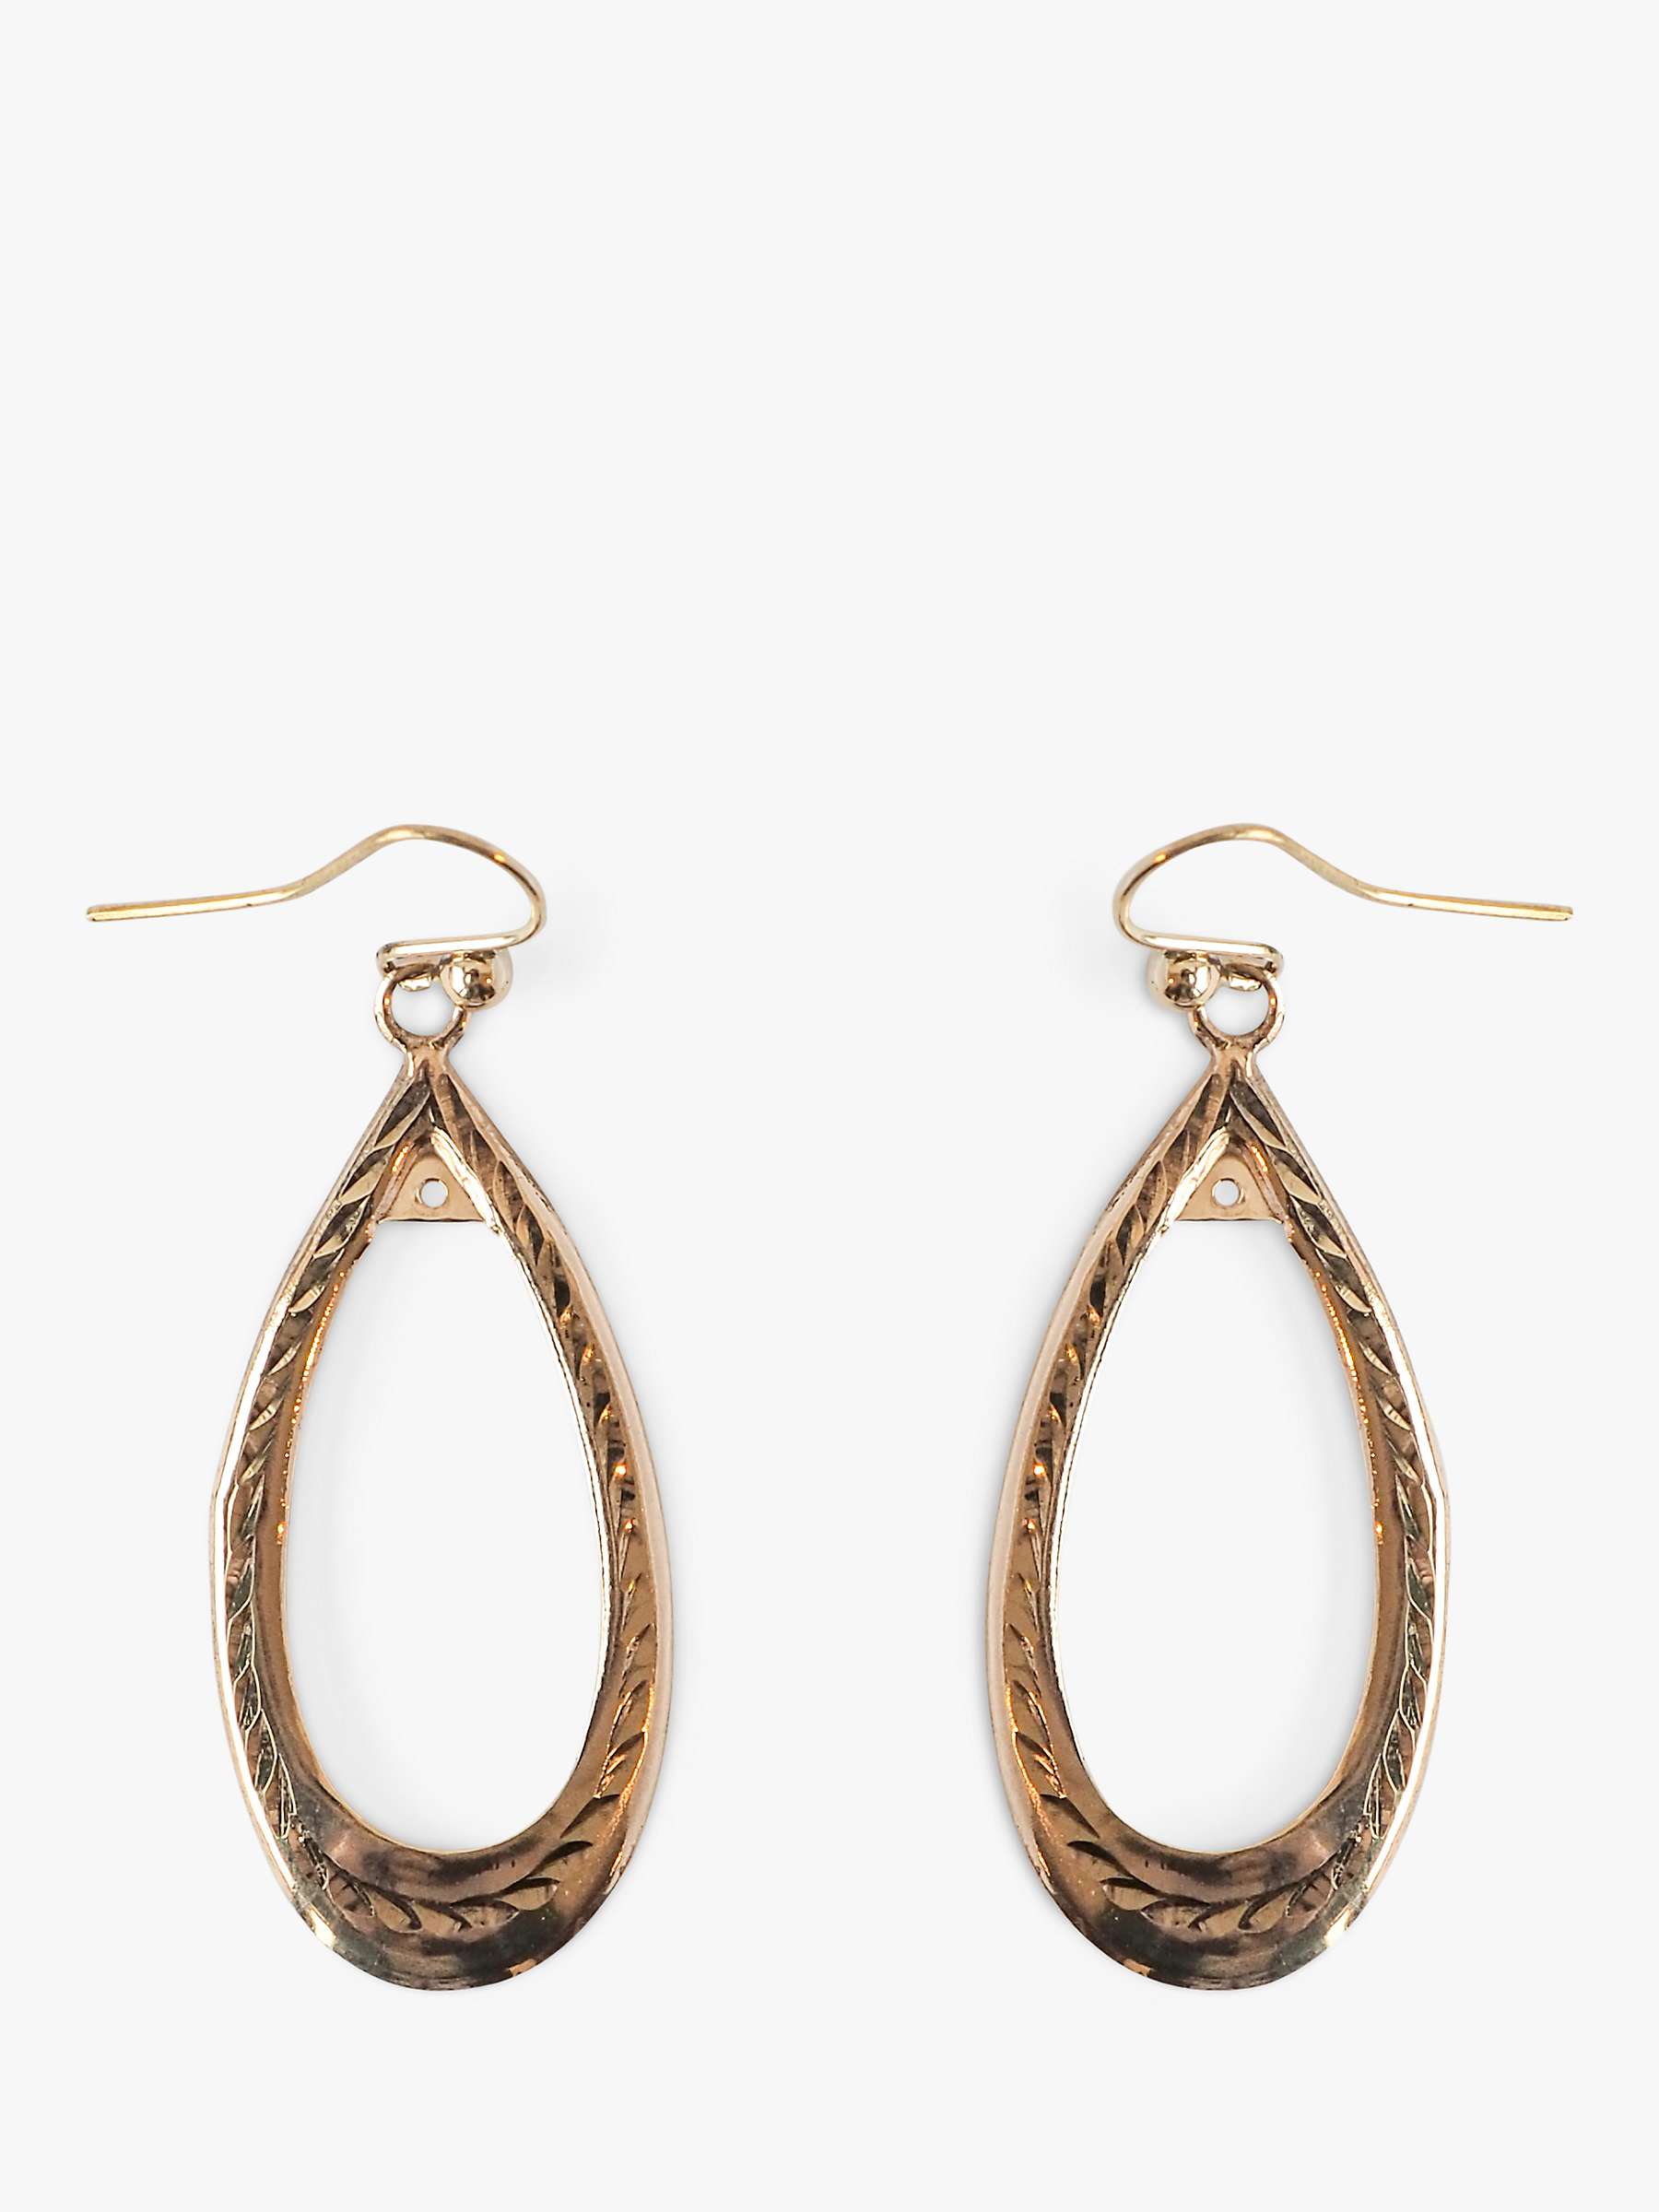 Buy L & T Heirlooms Second Hand 9ct Yellow Gold Oval Hoop Earrings, Gold Online at johnlewis.com